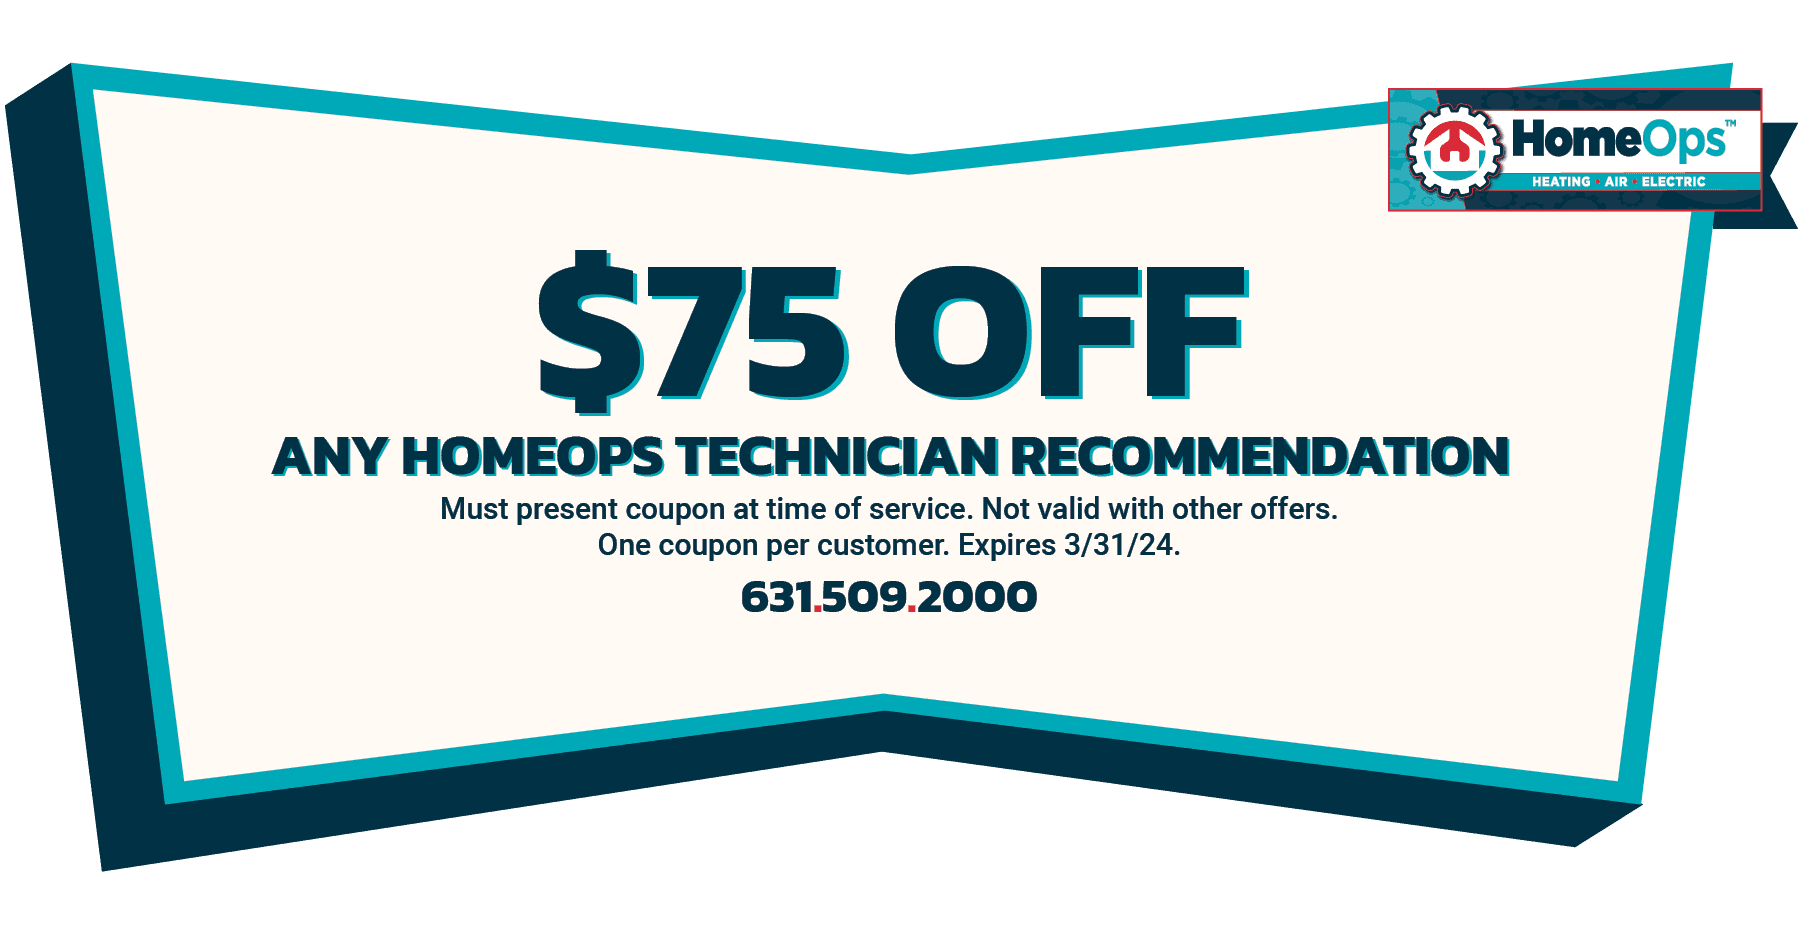  Off Any HomeOps Technician Recommendation expires March 31st, 2024.